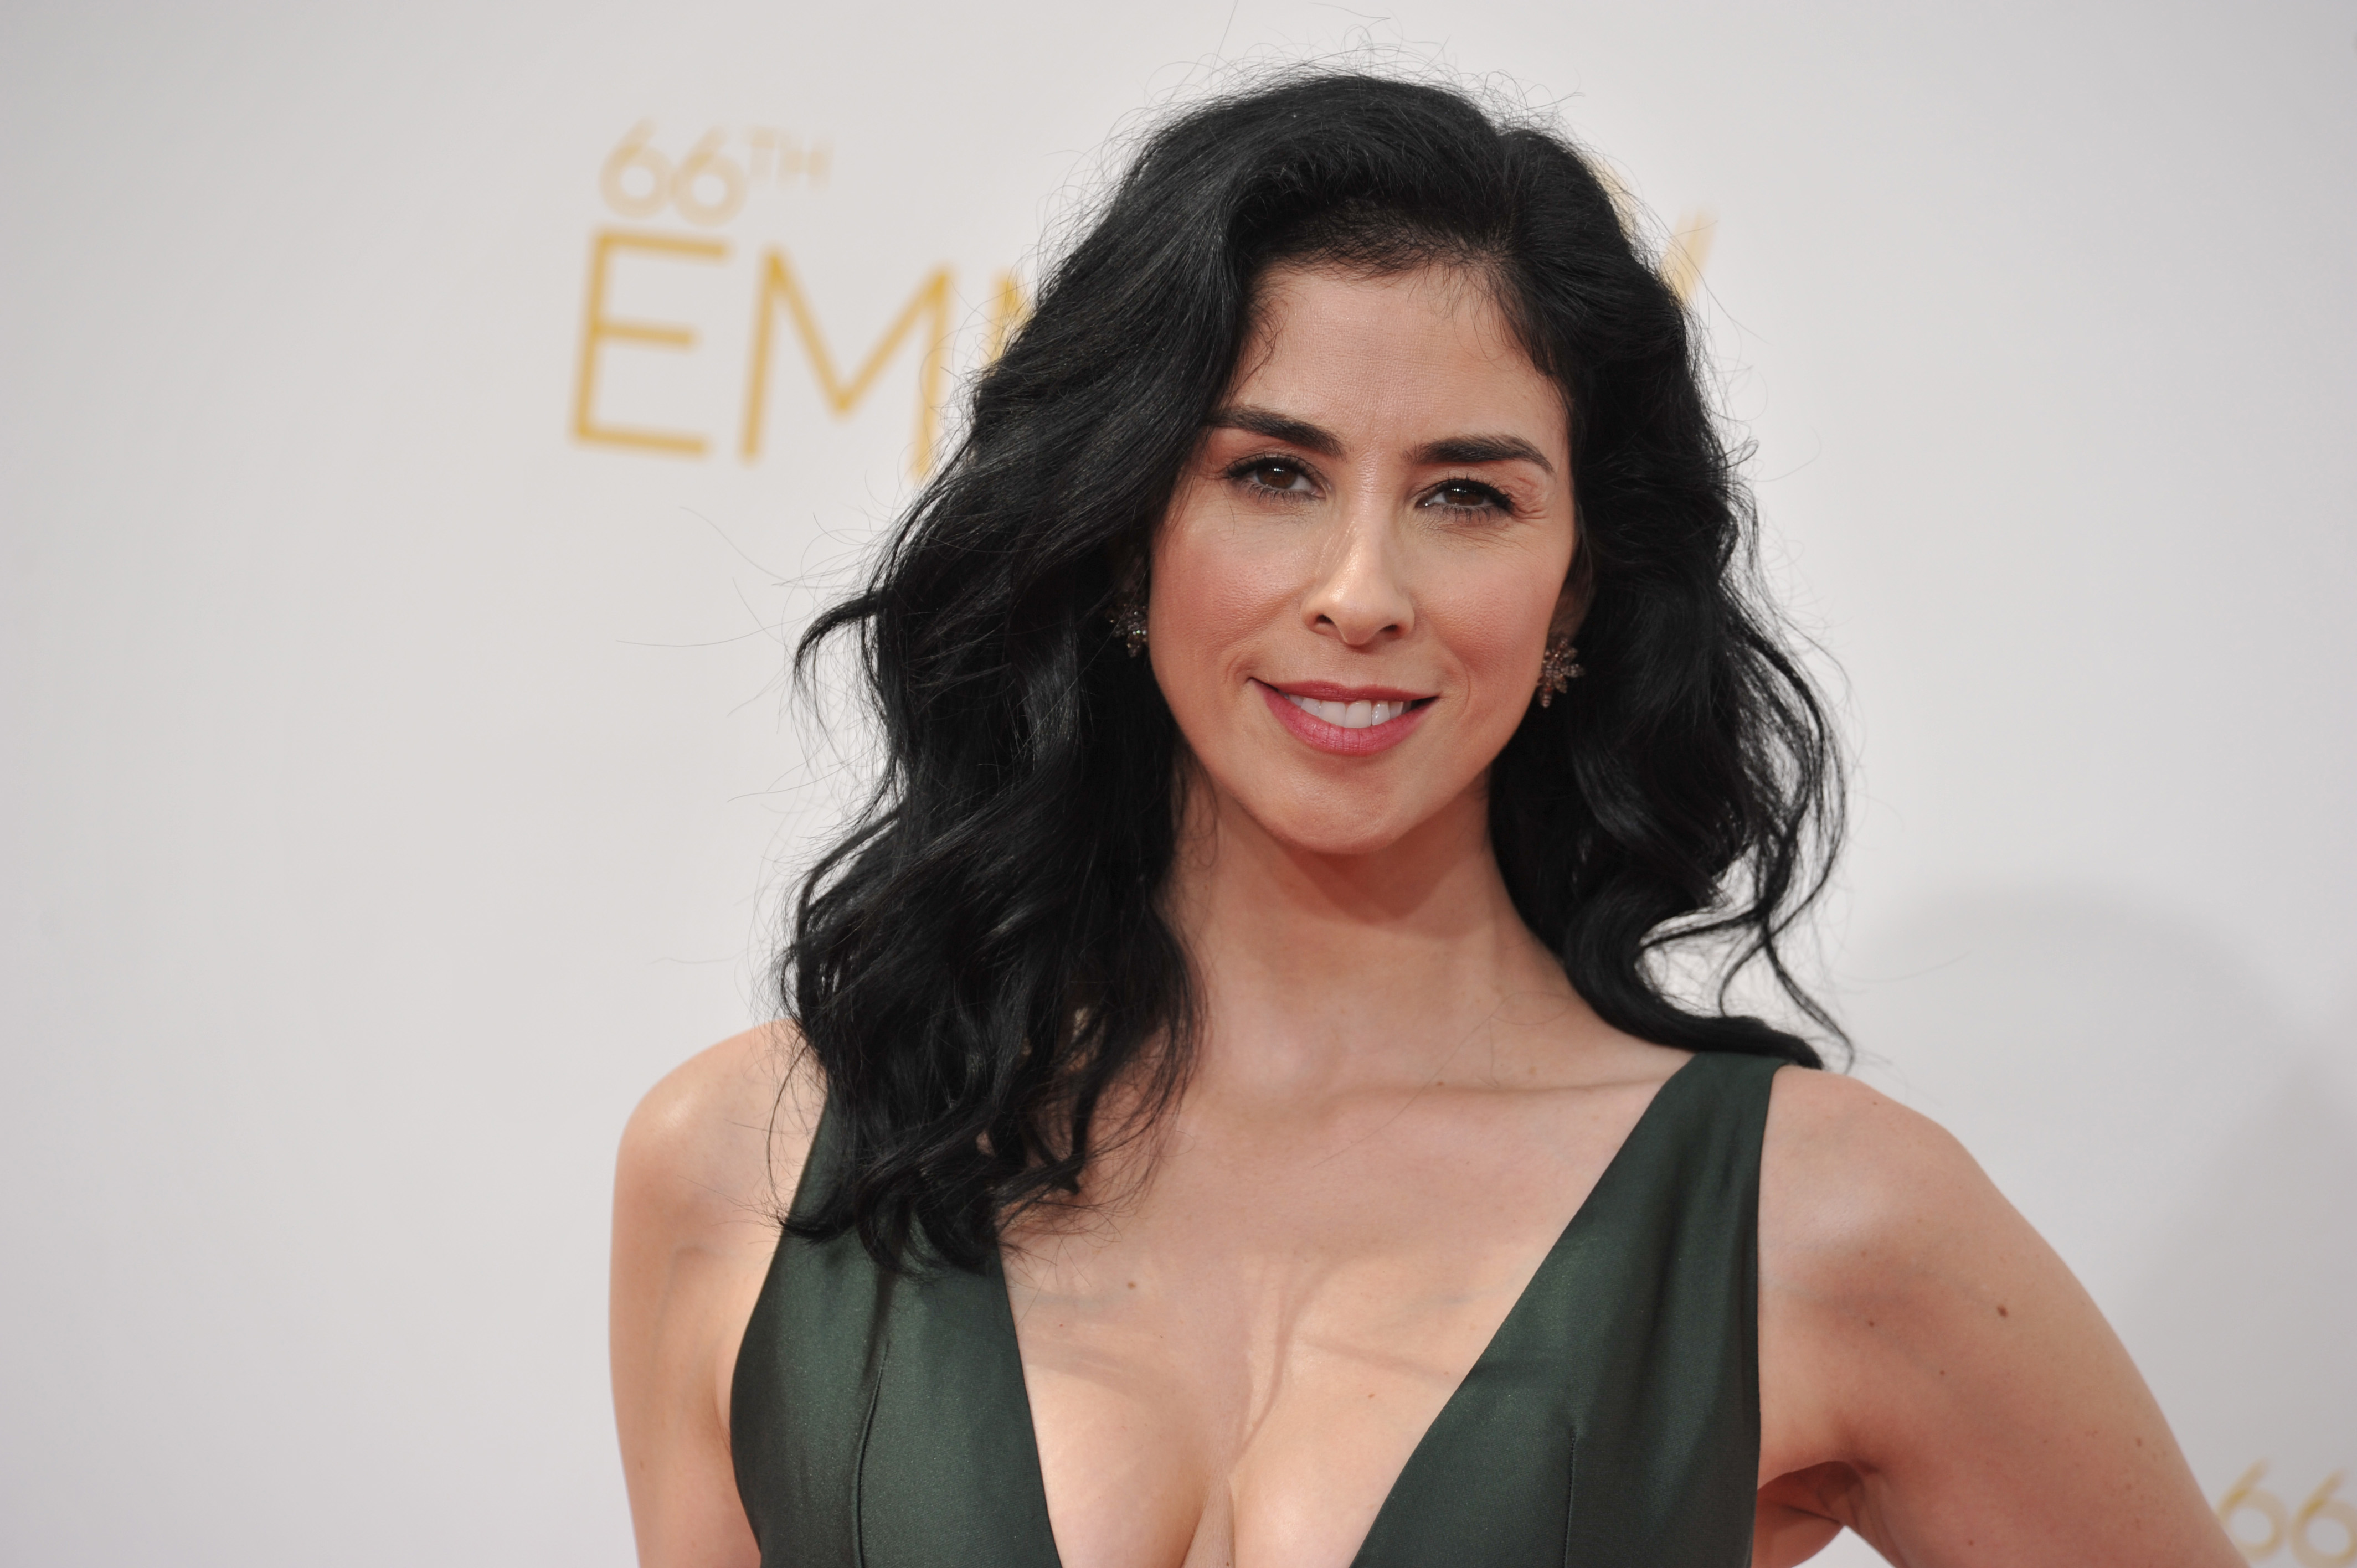 Sarah Silverman arrives at the 66th Annual Primetime Emmy Awards at the Nokia Theatre L.A. Live on Monday, Aug. 25, 2014, in Los Angeles. (Photo by Richard Shotwell/Invision/AP) (Richard Shotwell&mdash;Richard Shotwell/Invision/AP)